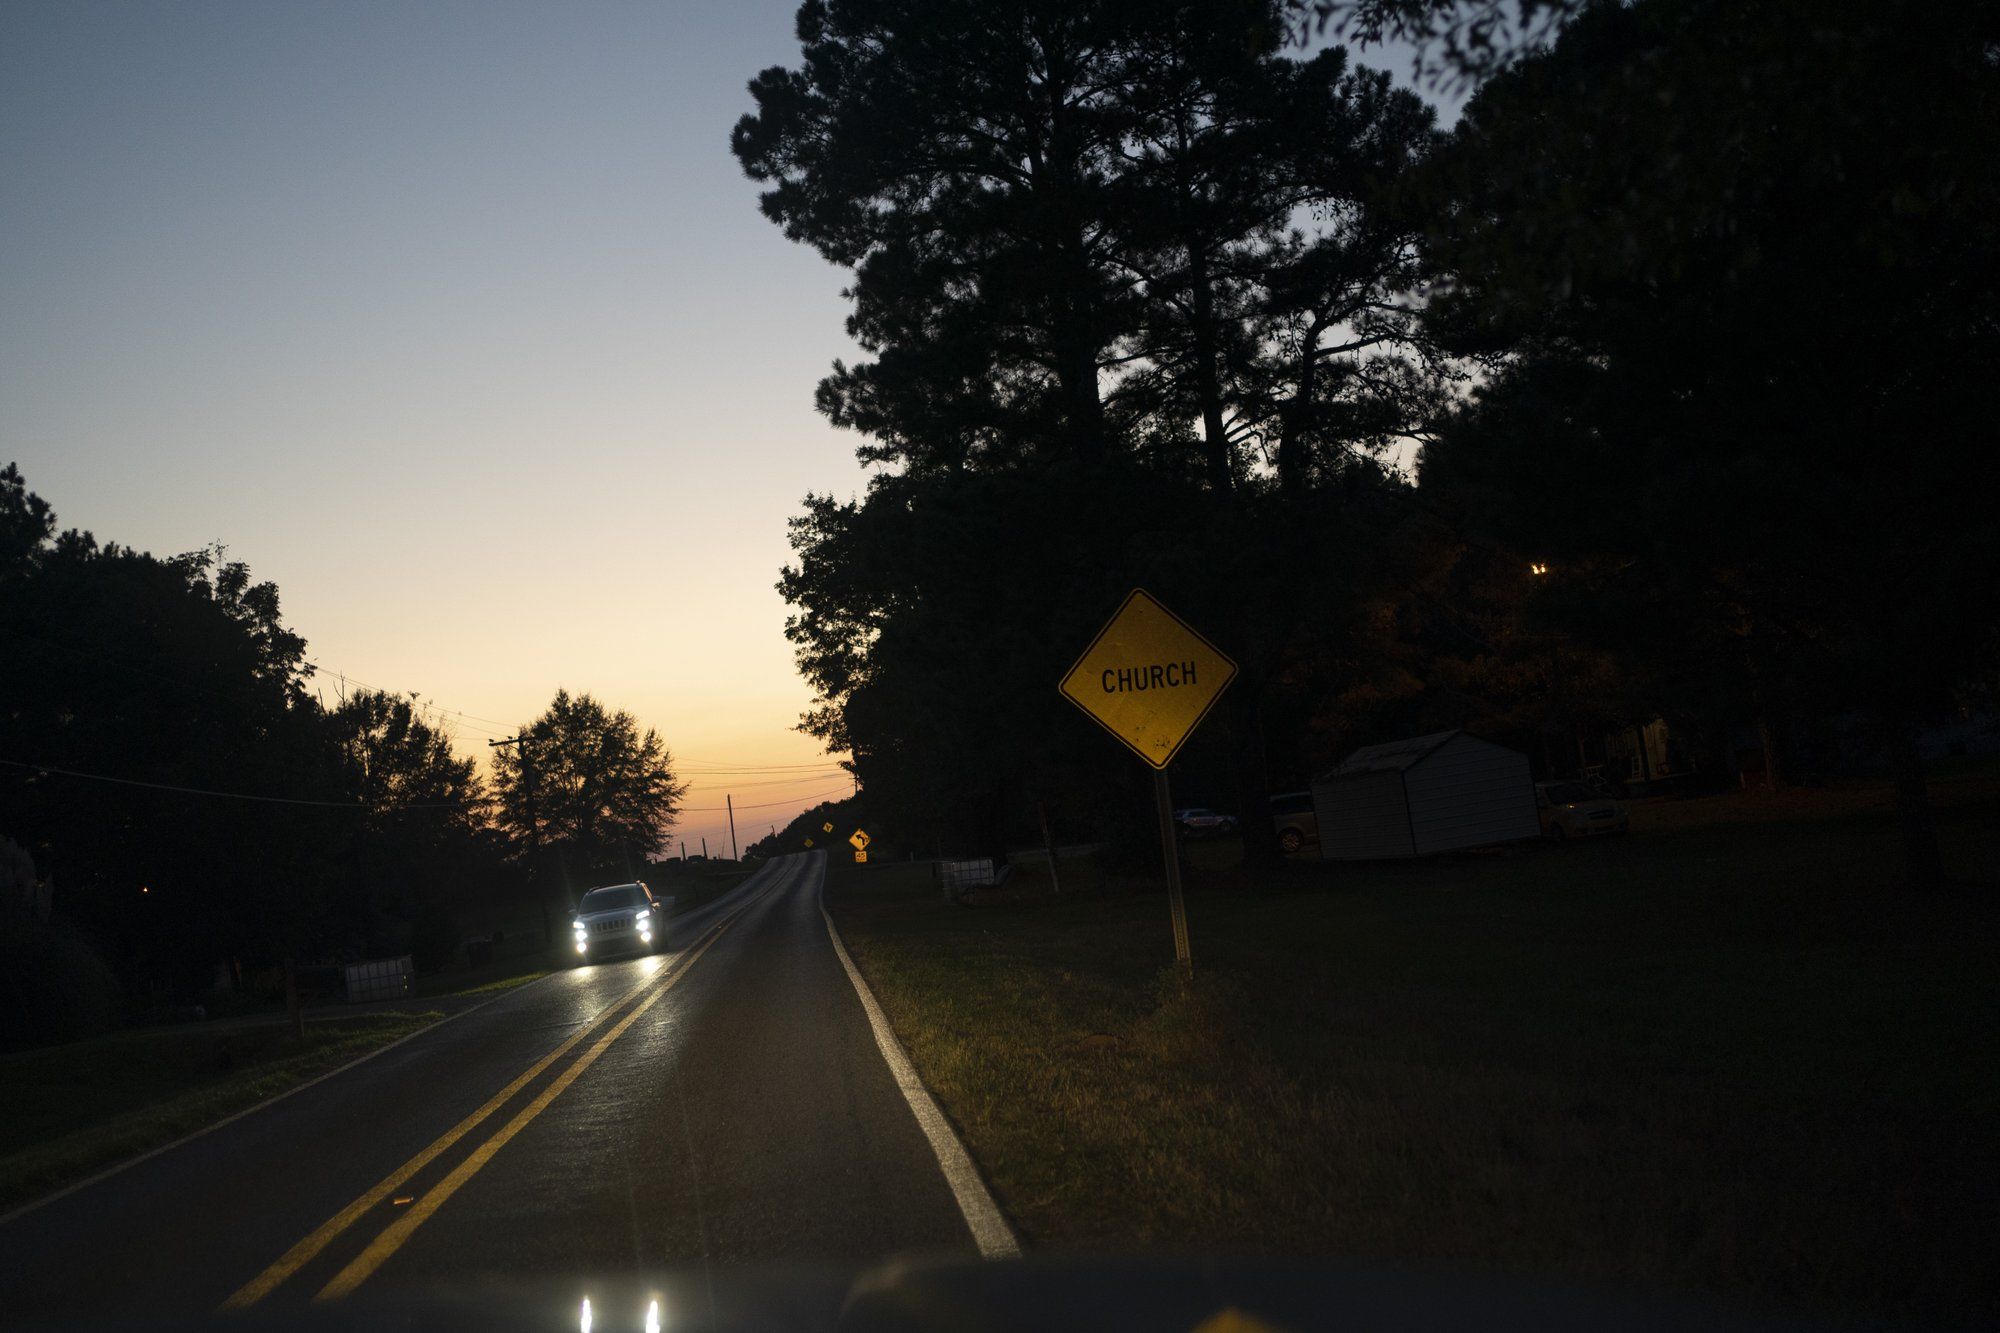 A vehicle travels down a road along Mt. Zion United Methodist Church at dusk in Philadelphia, Miss. Image by Wong Maye-E / The Associated Press. United States, 2020.